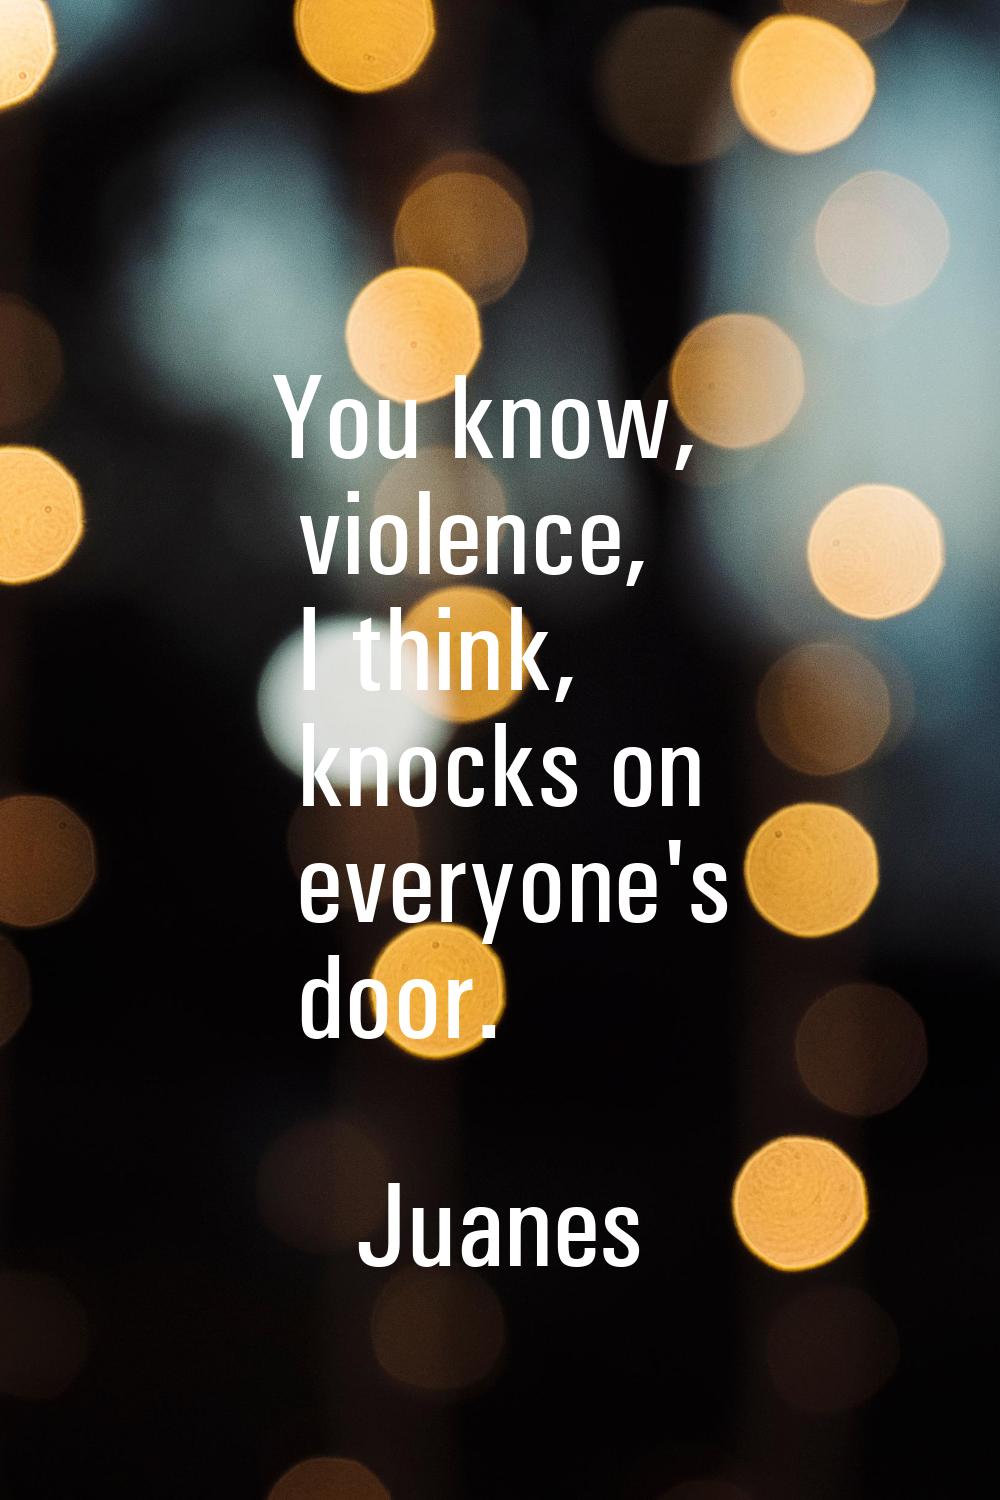 You know, violence, I think, knocks on everyone's door.